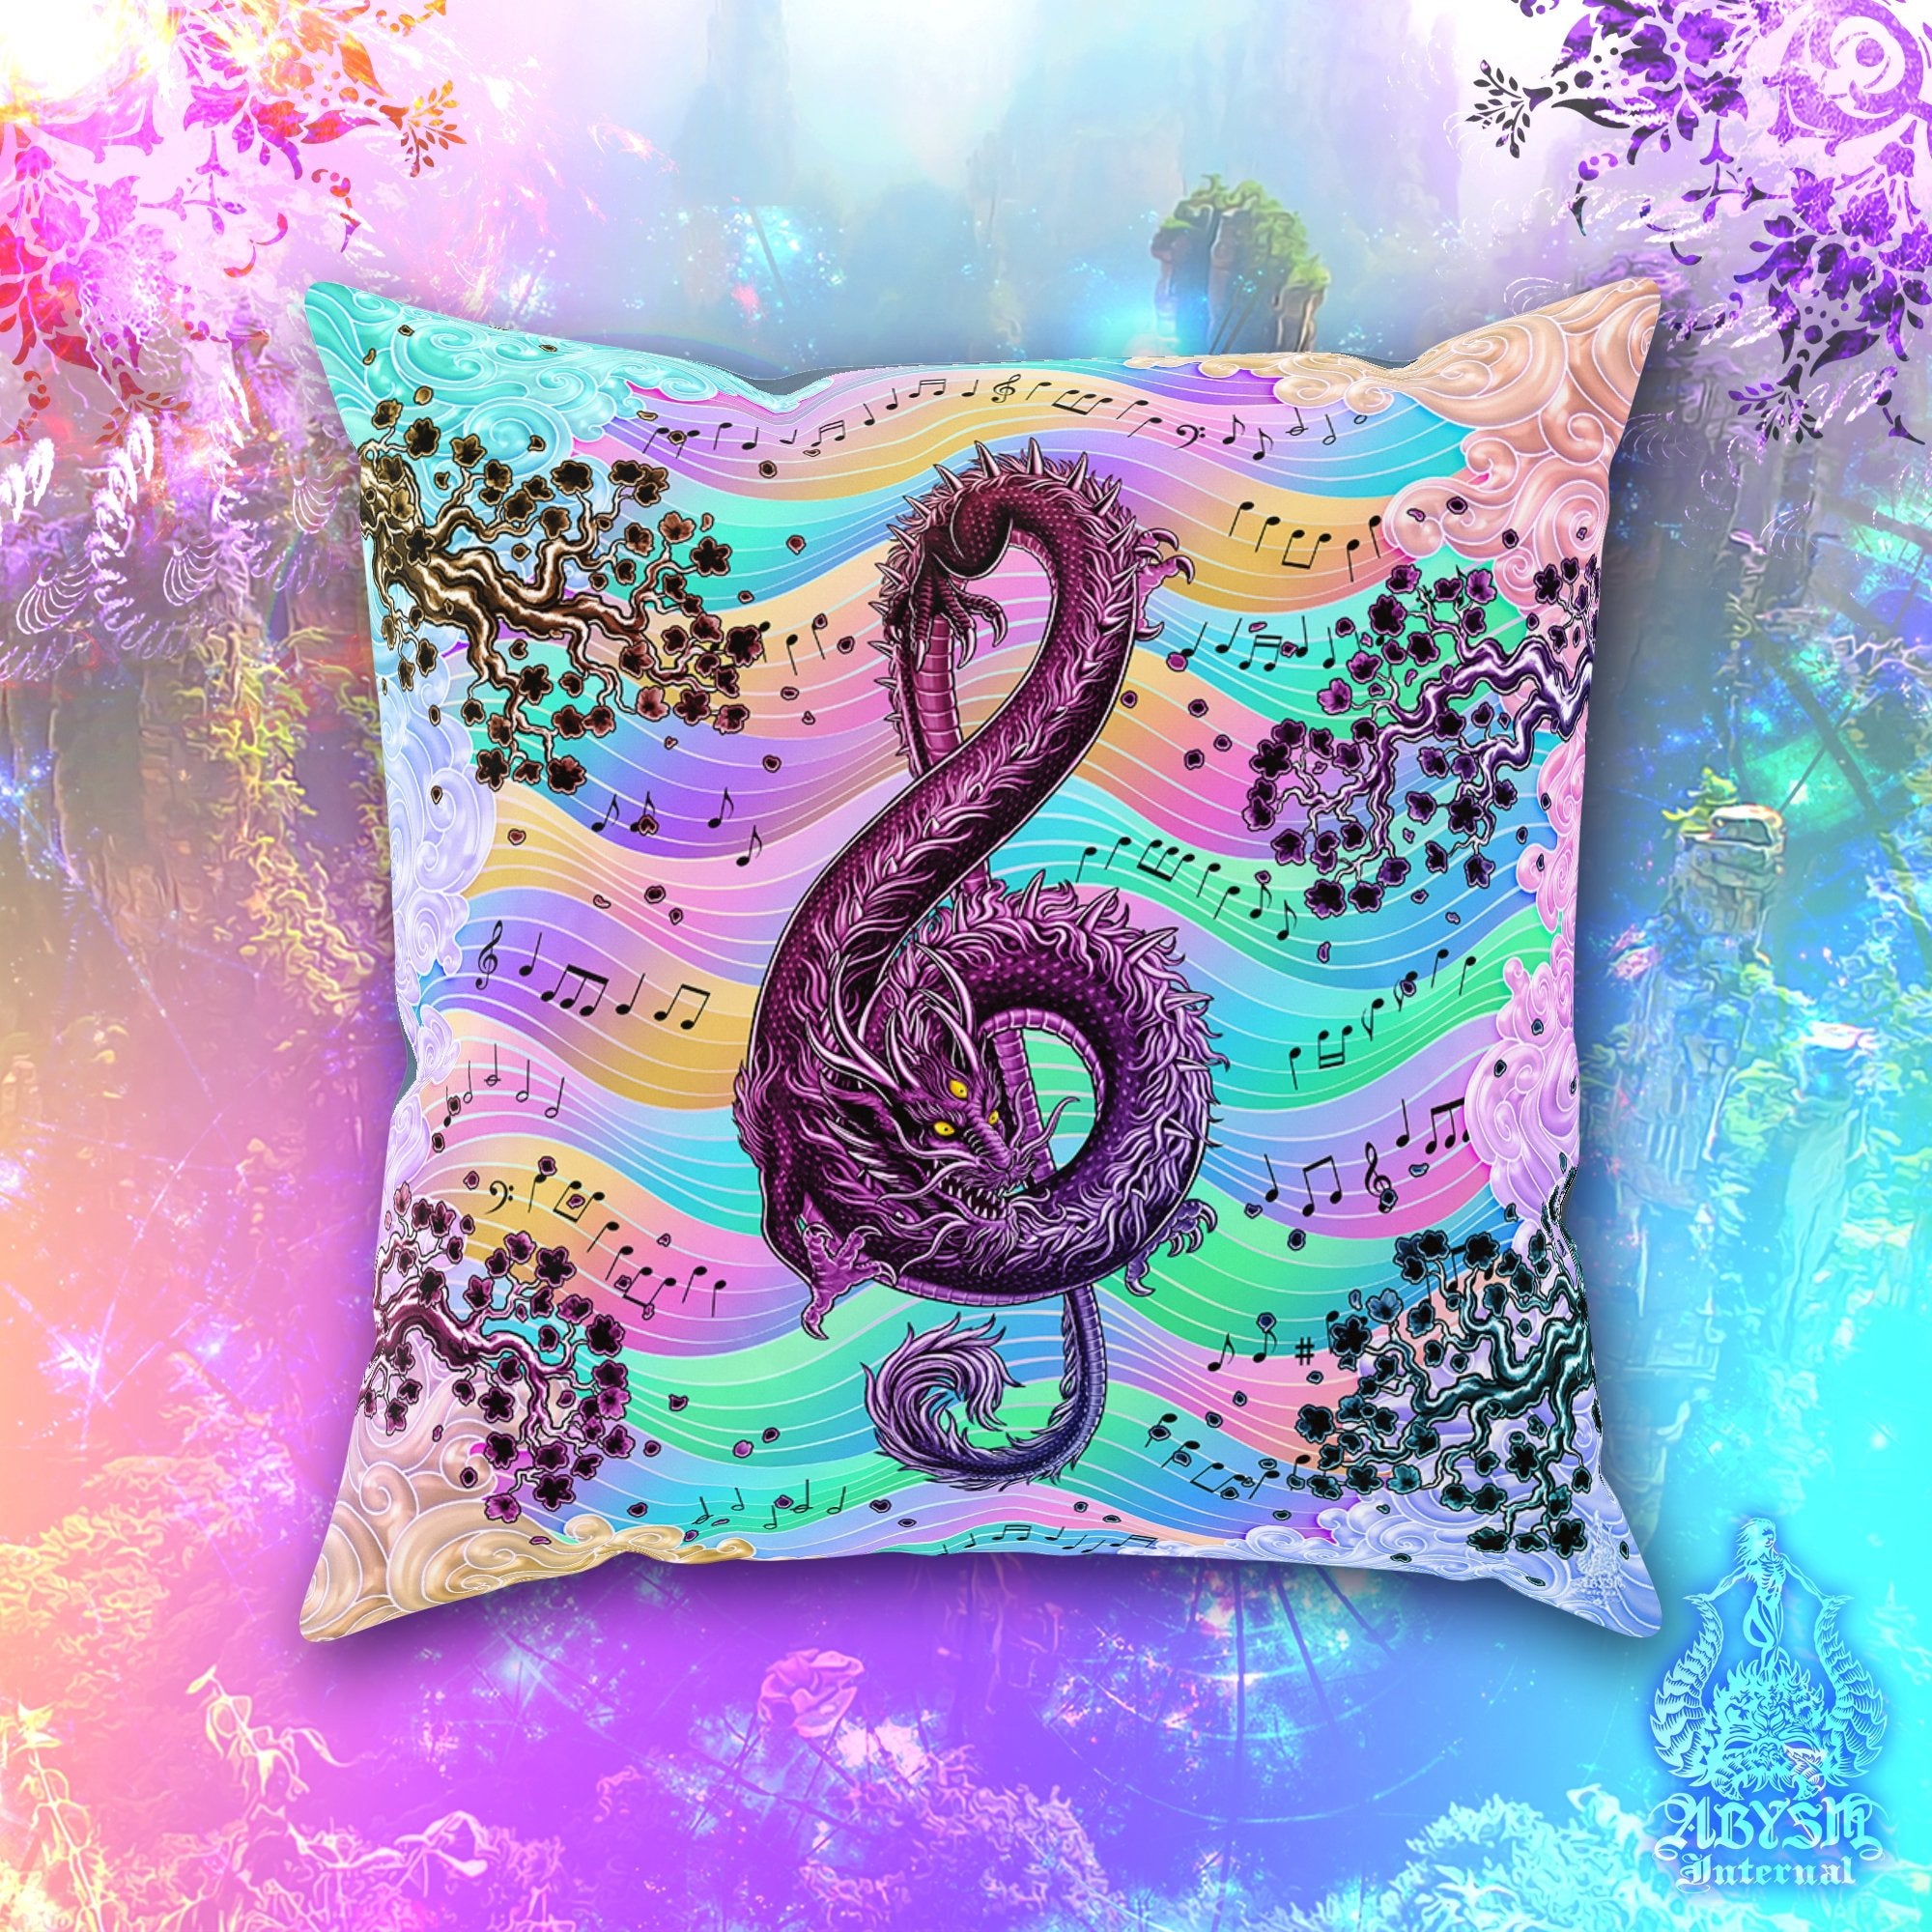 Treble Clef Throw Pillow, Decorative Accent Pillow, Square Cushion